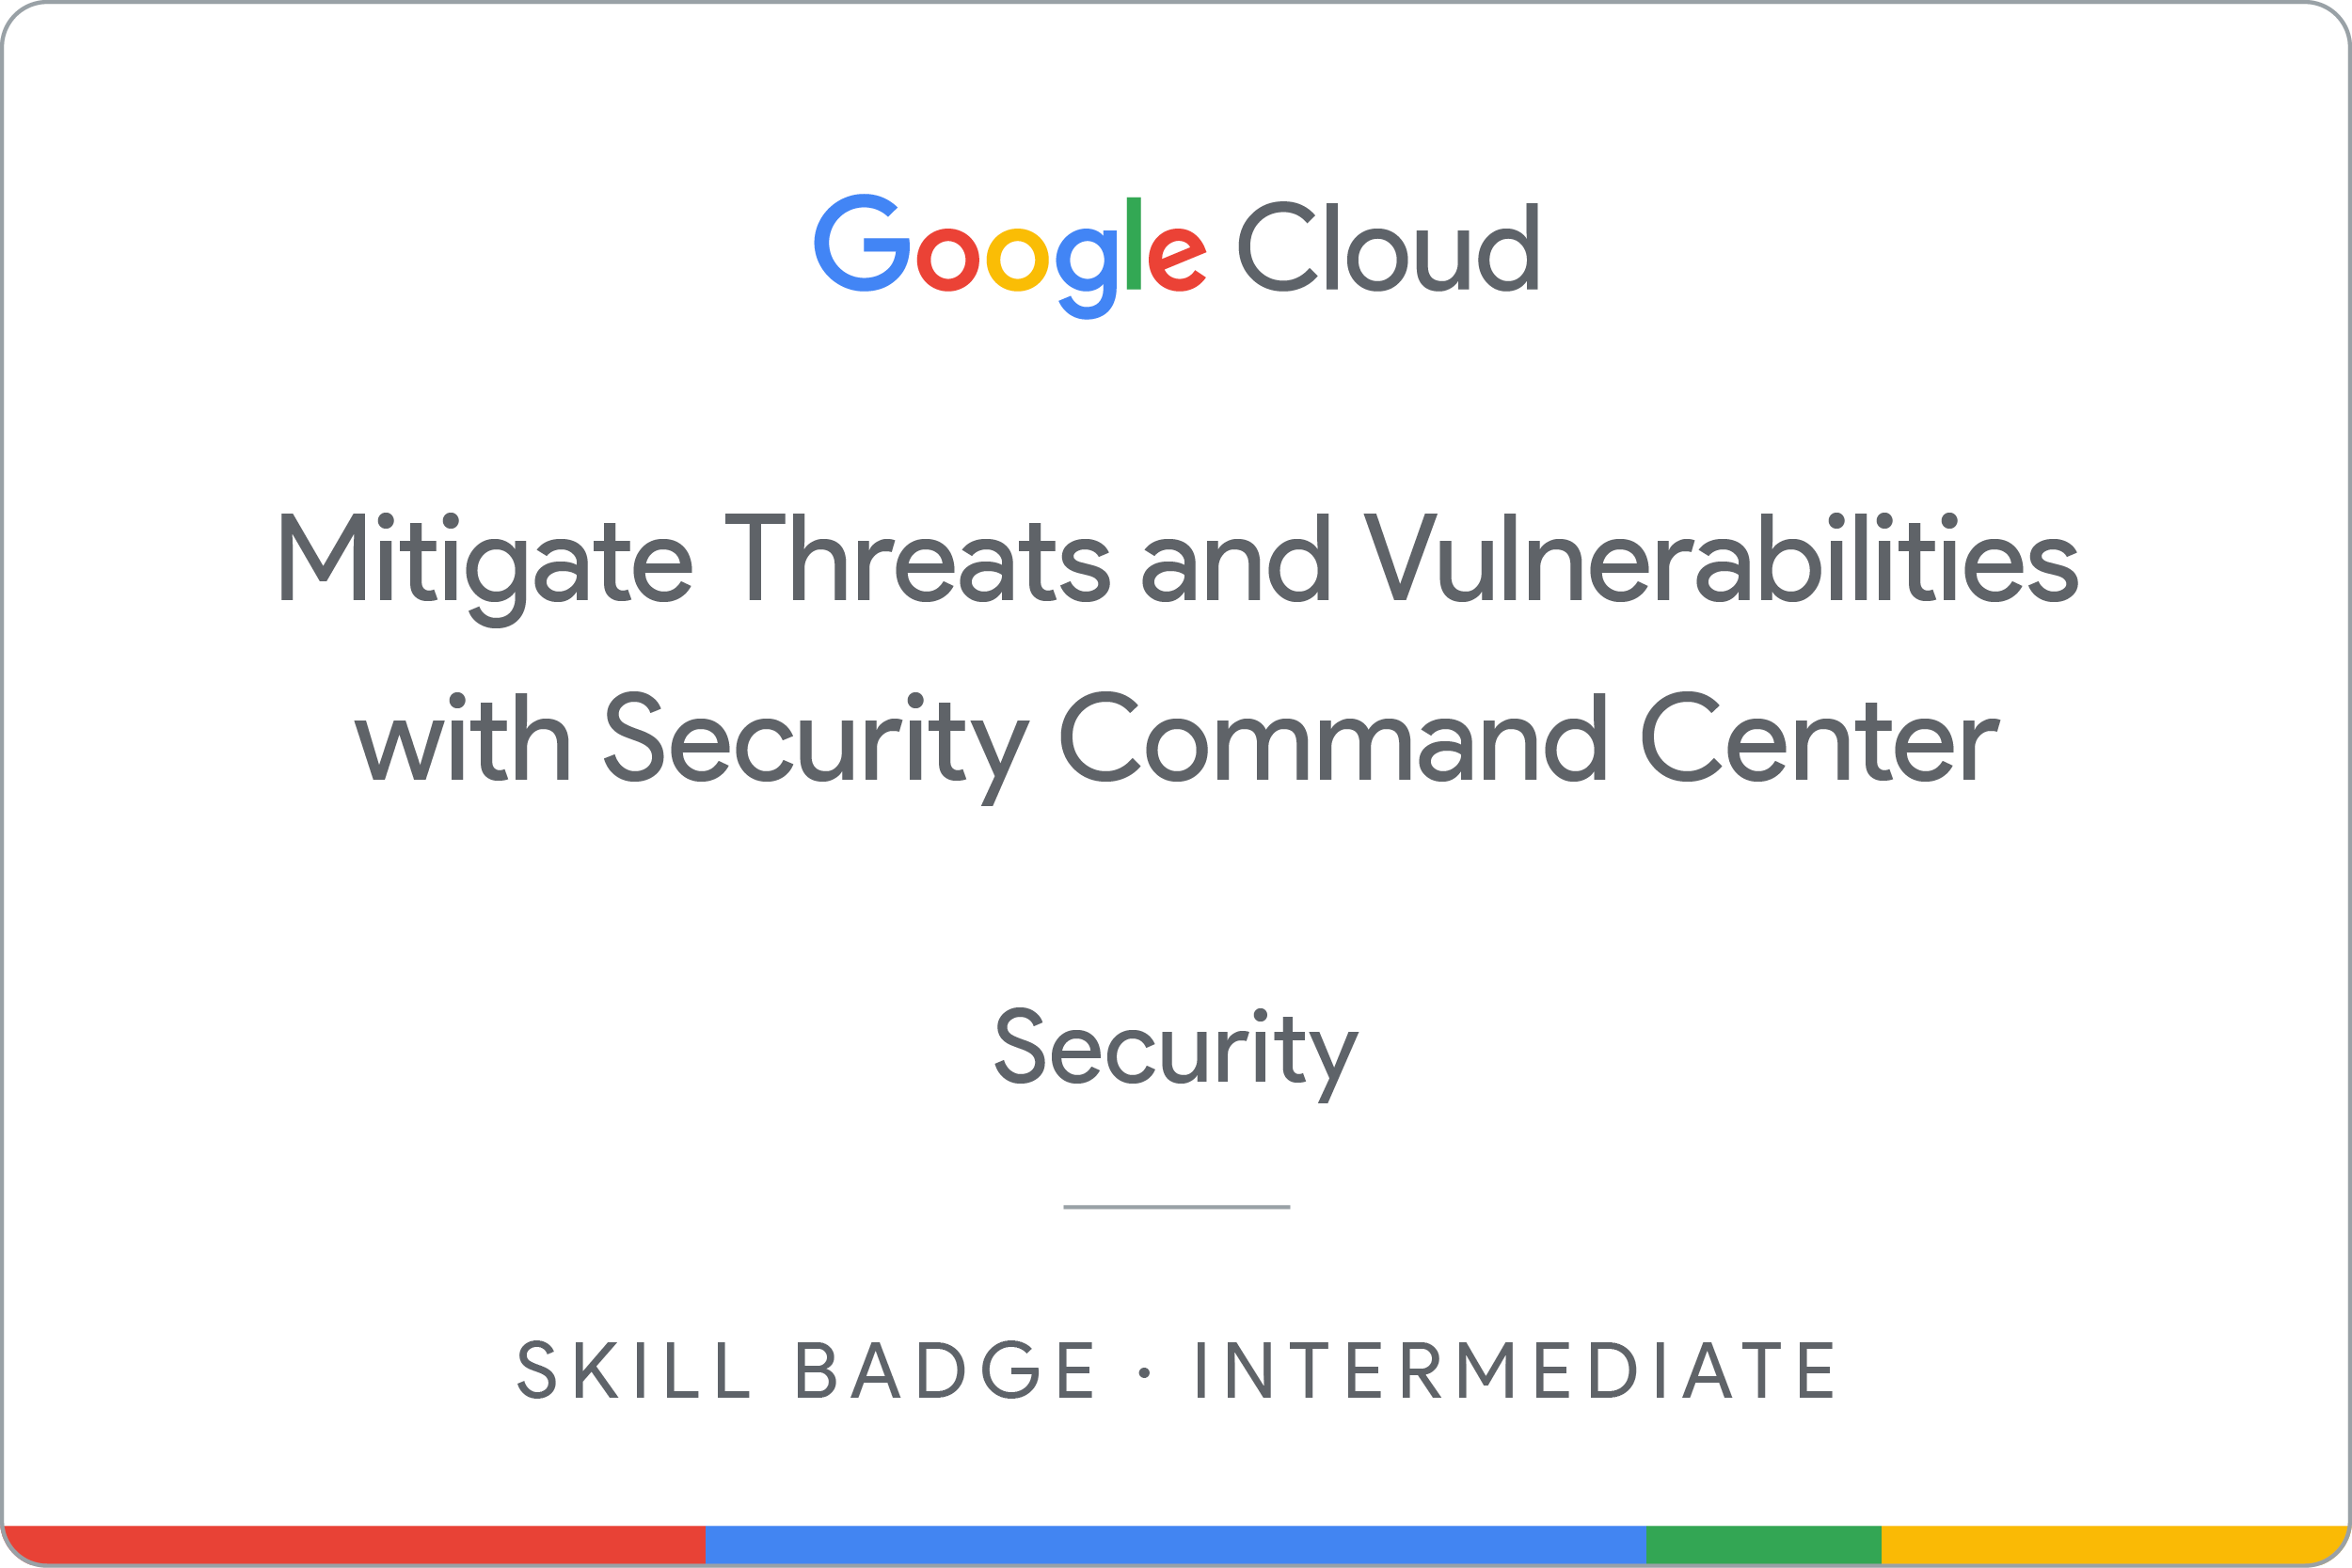 Mitigate Threats and Vulnerabilities with Security Command Center skill badge